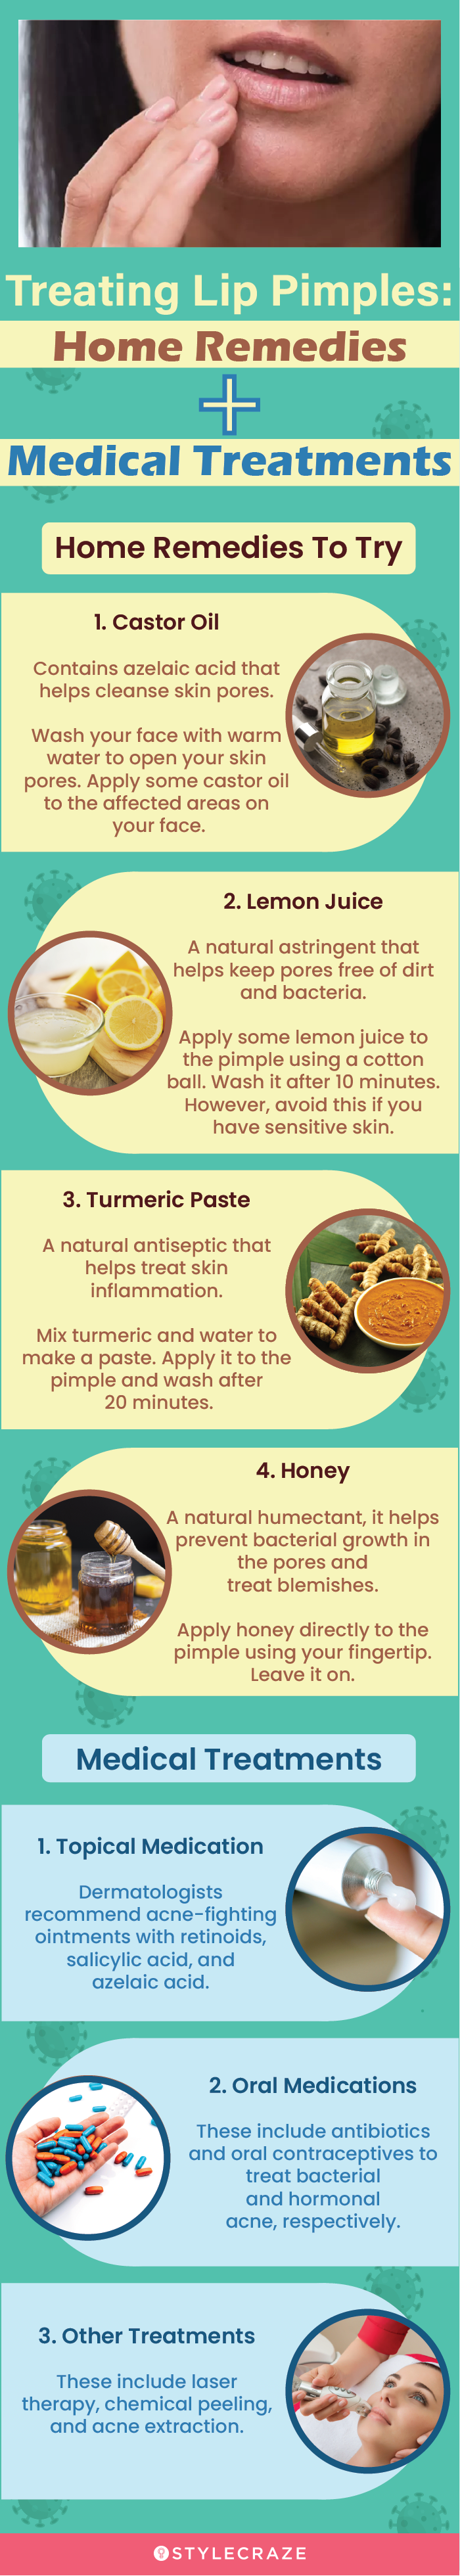 treating lip pimples: home remedies + medical treatments (infographic)